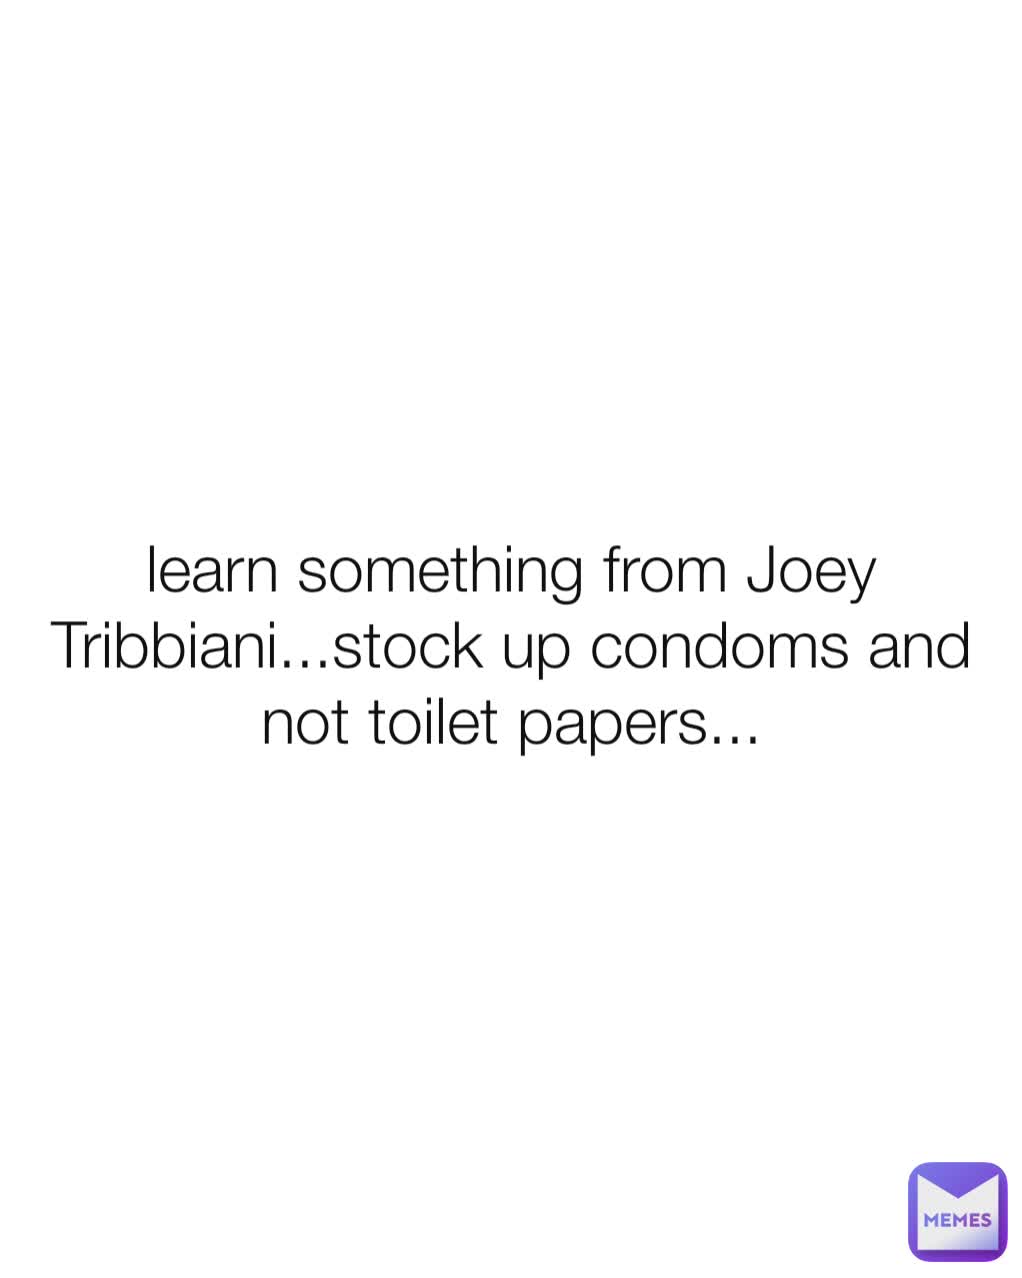 learn something from Joey Tribbiani...stock up condoms and not toilet papers...